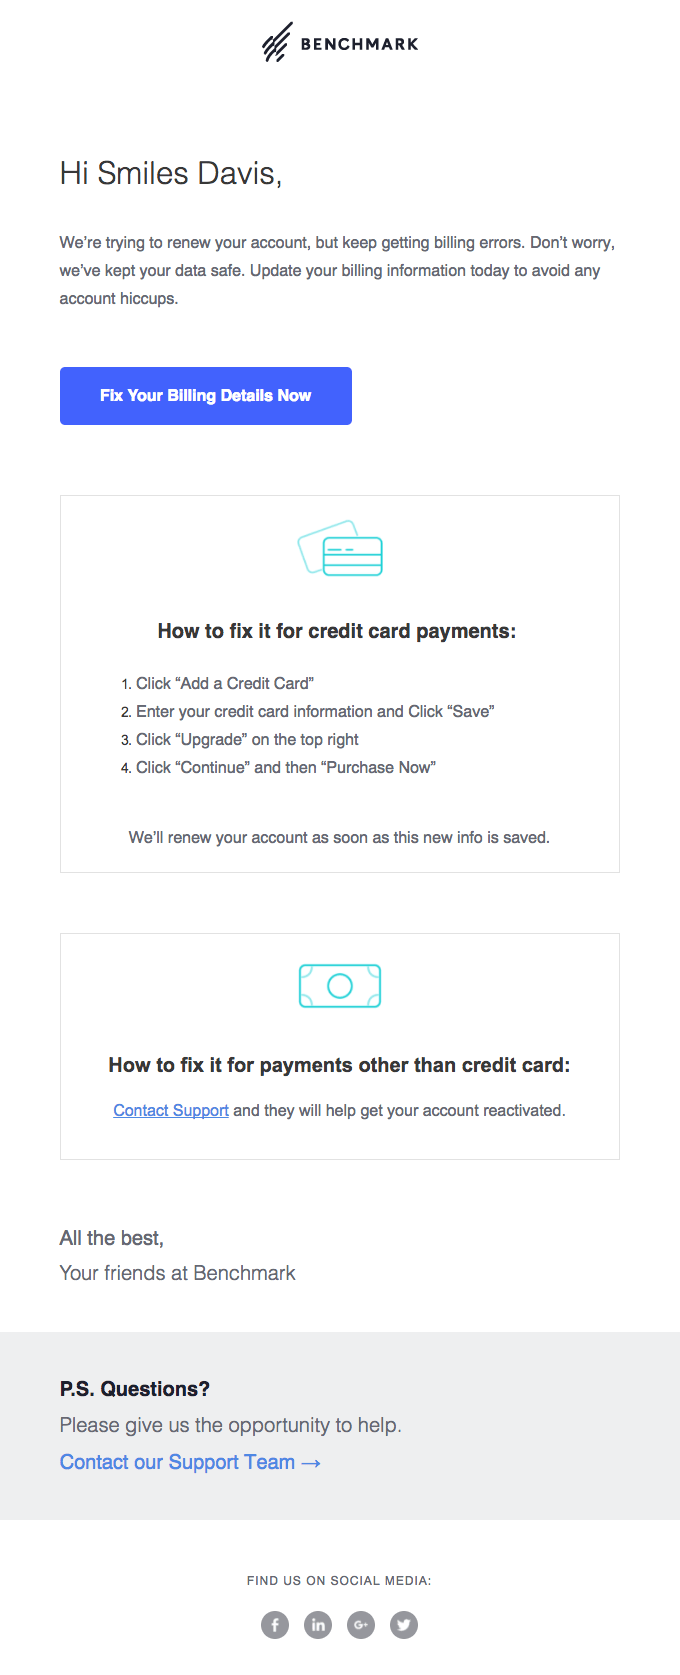 Benchmark email about credit card information